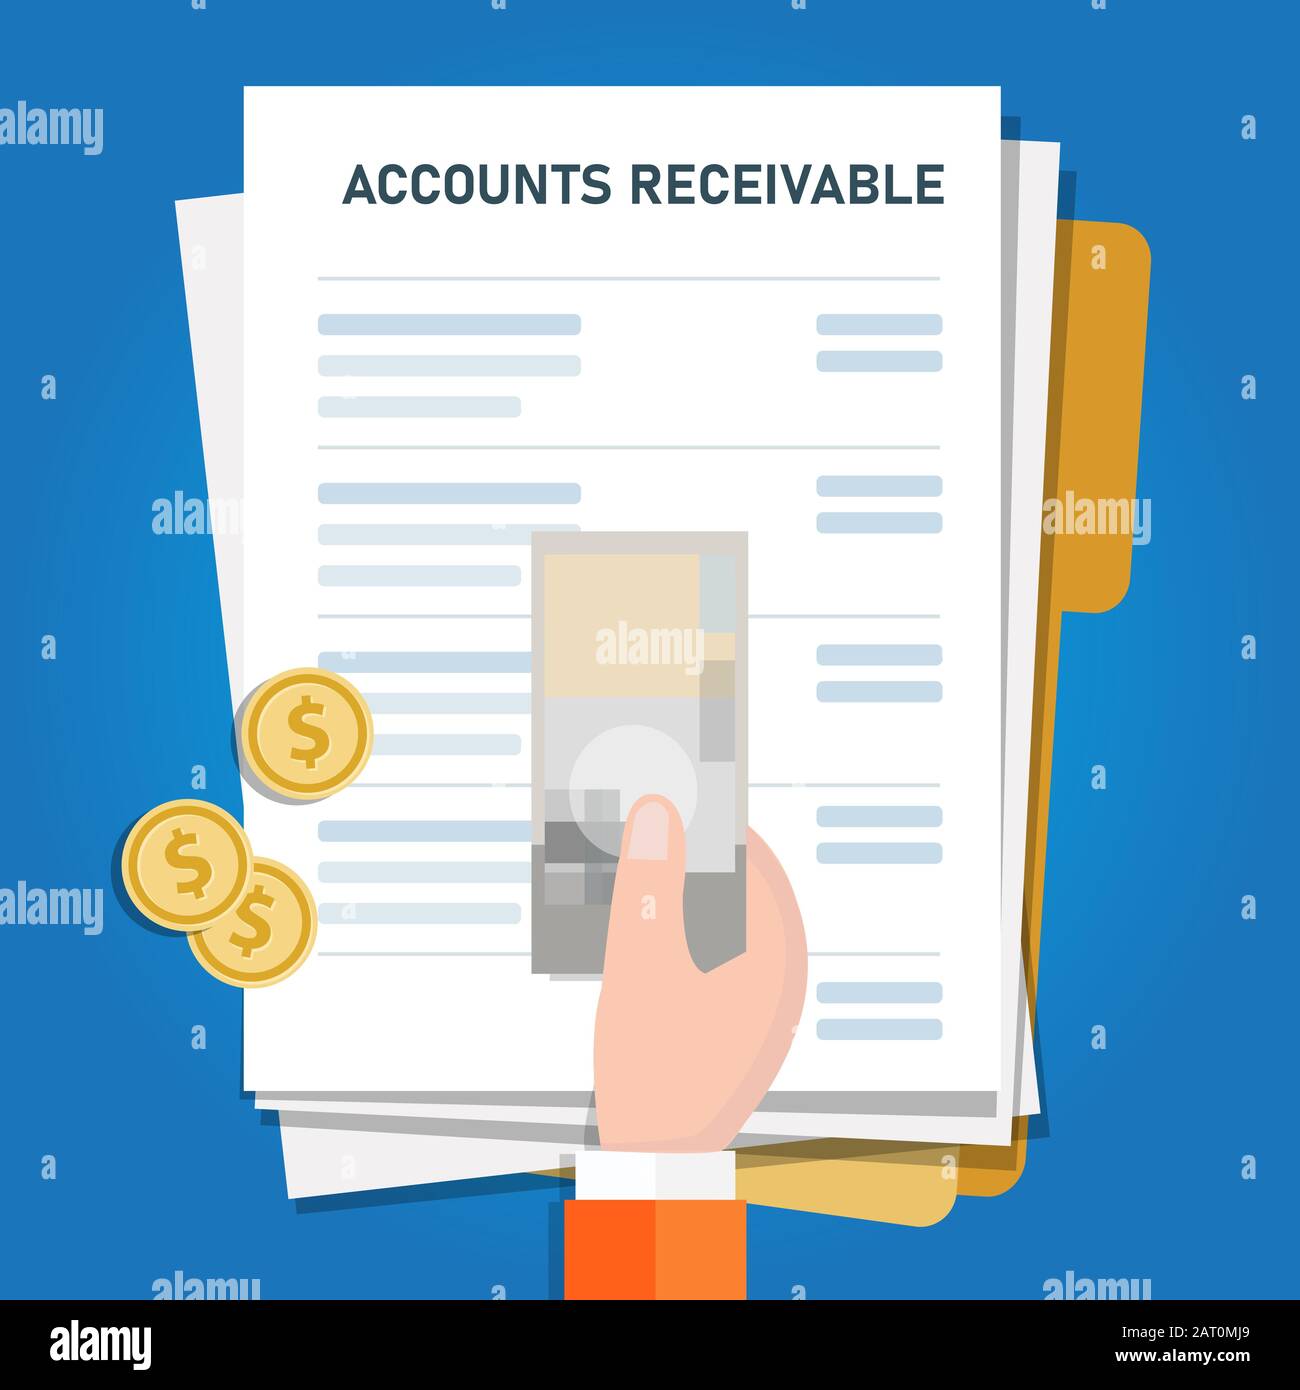 Accounts receivable money financial management in company, hand holding money on top of invoice for payment Stock Vector